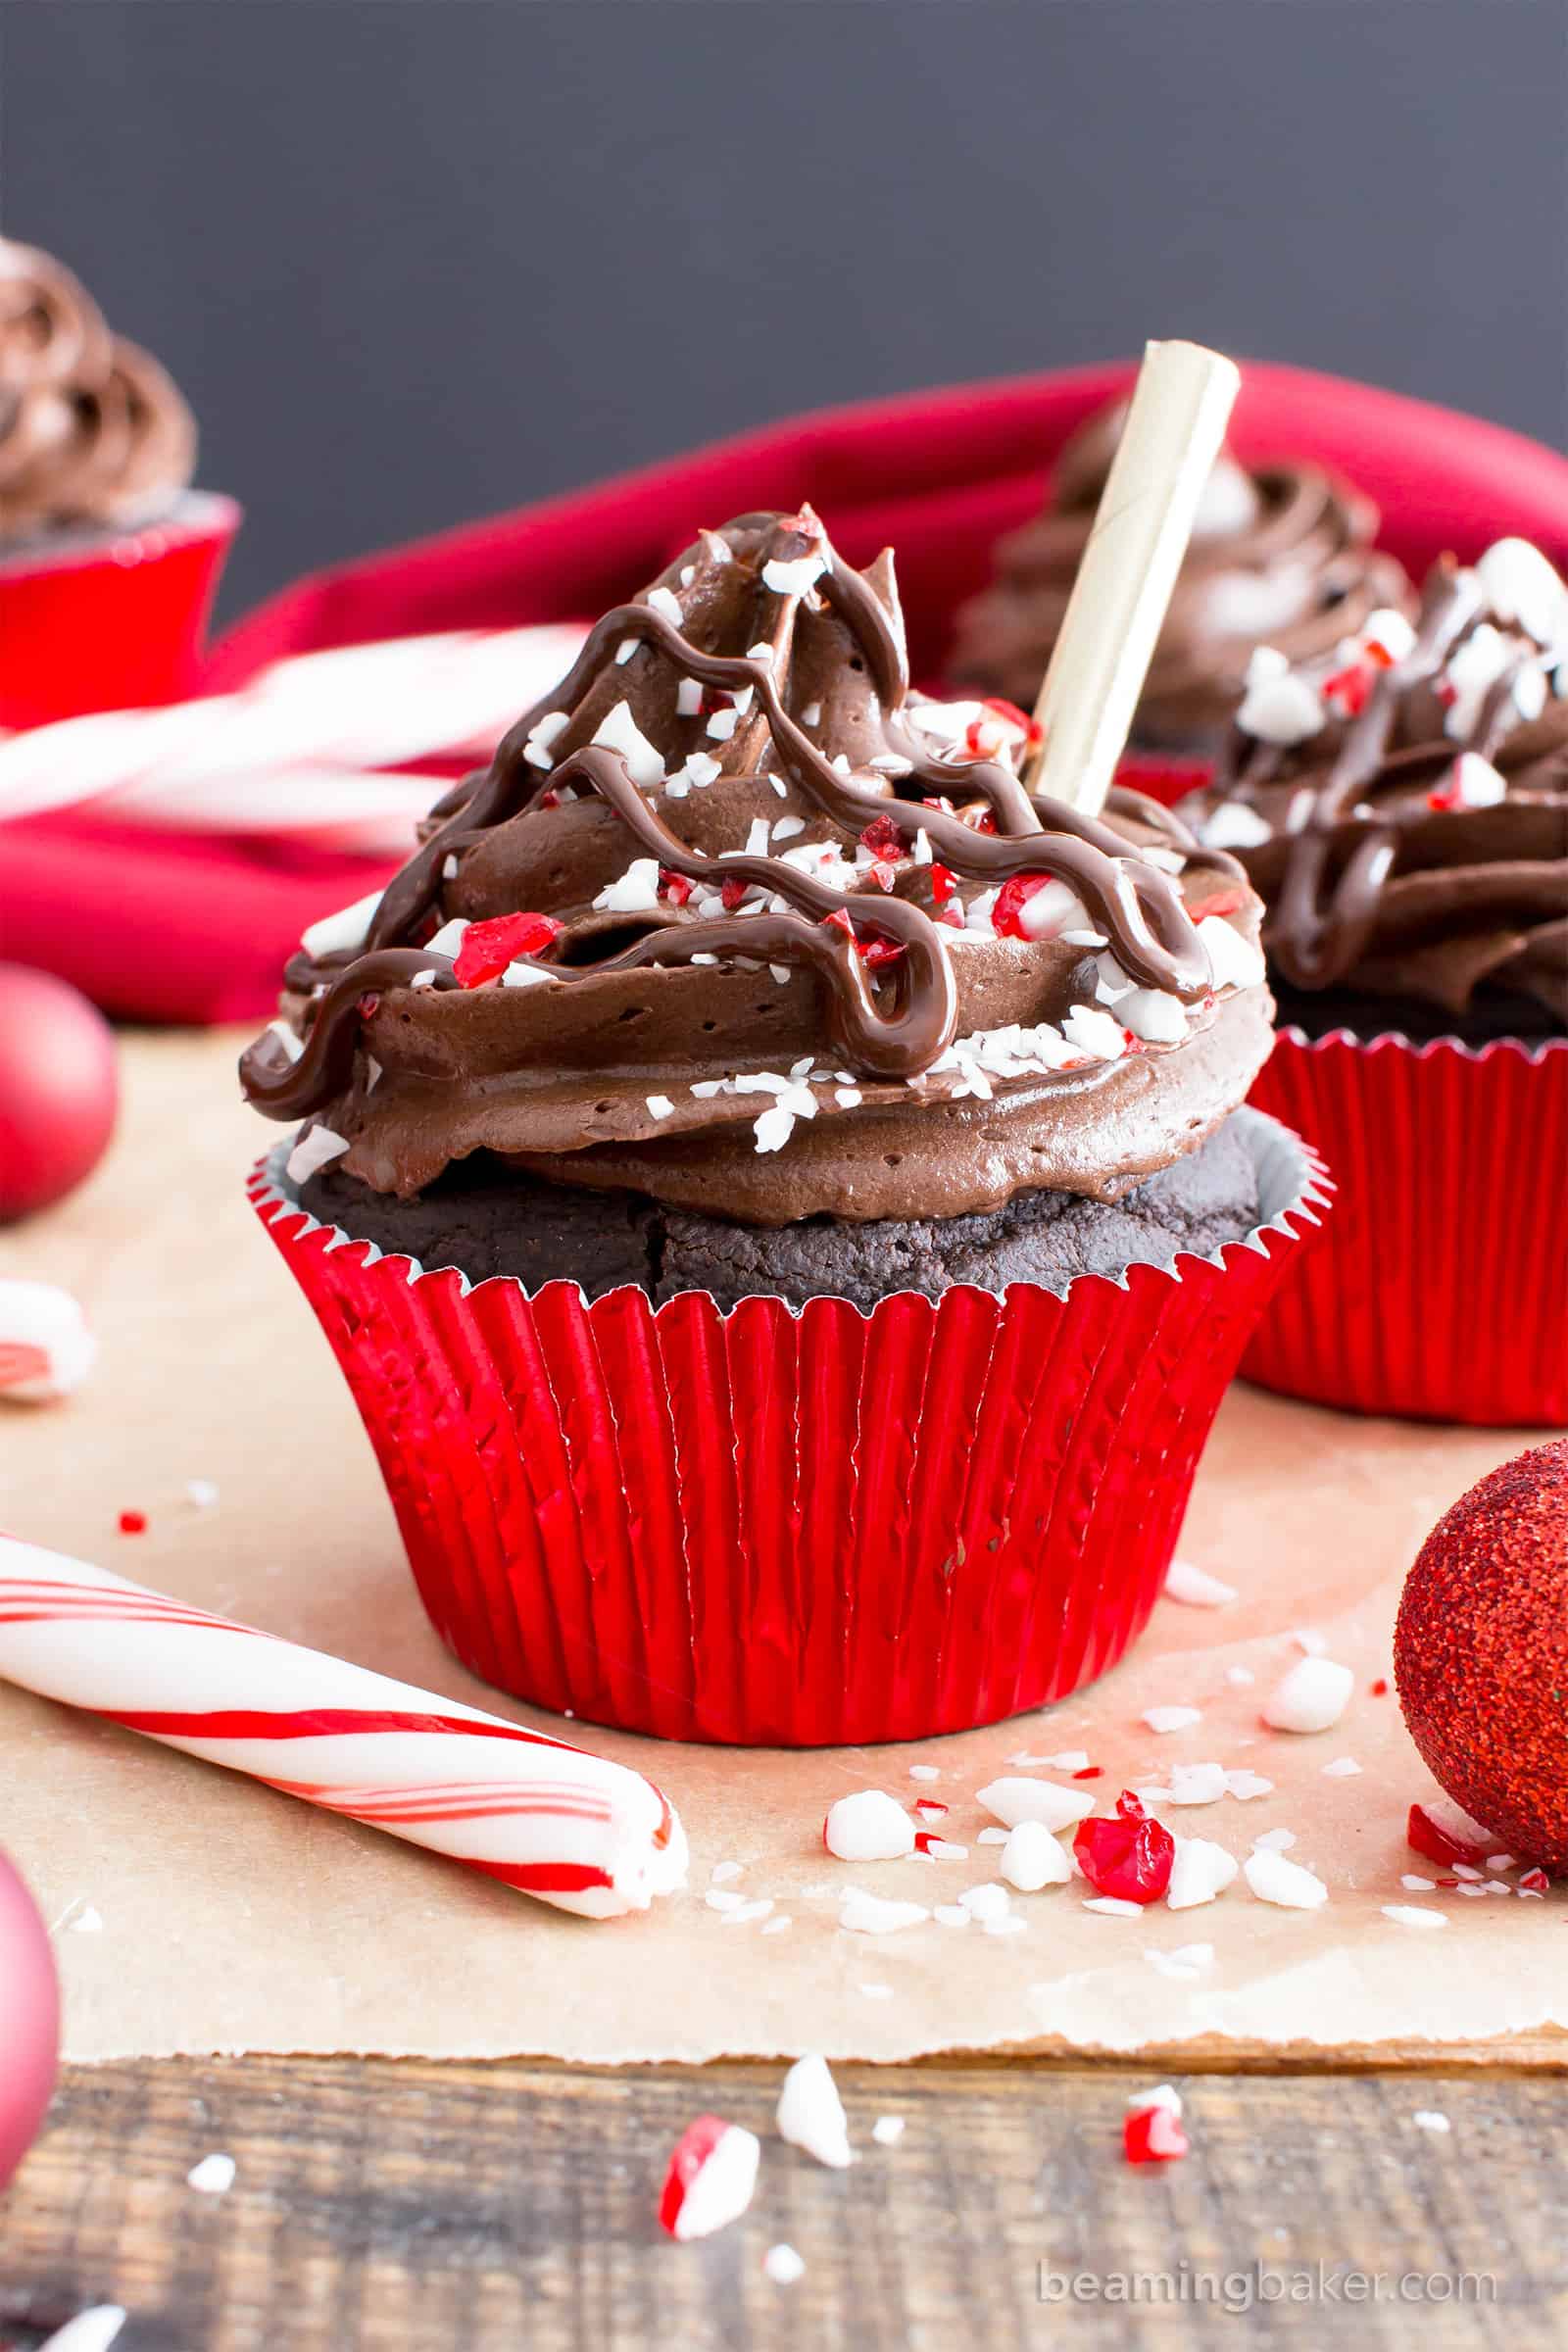 Vegan Peppermint Mocha Cupcakes (V, GF): a festive recipe for rich ‘n moist chocolate cupcakes bursting with peppermint mocha flavors and topped with rich, smooth frosting. #Vegan #GlutenFree #DairyFree #Dessert #Cupcakes #Christmas #SimpleMills #SimpleGiftofHealth #TheSimpleWay | Recipe on BeamingBaker.com